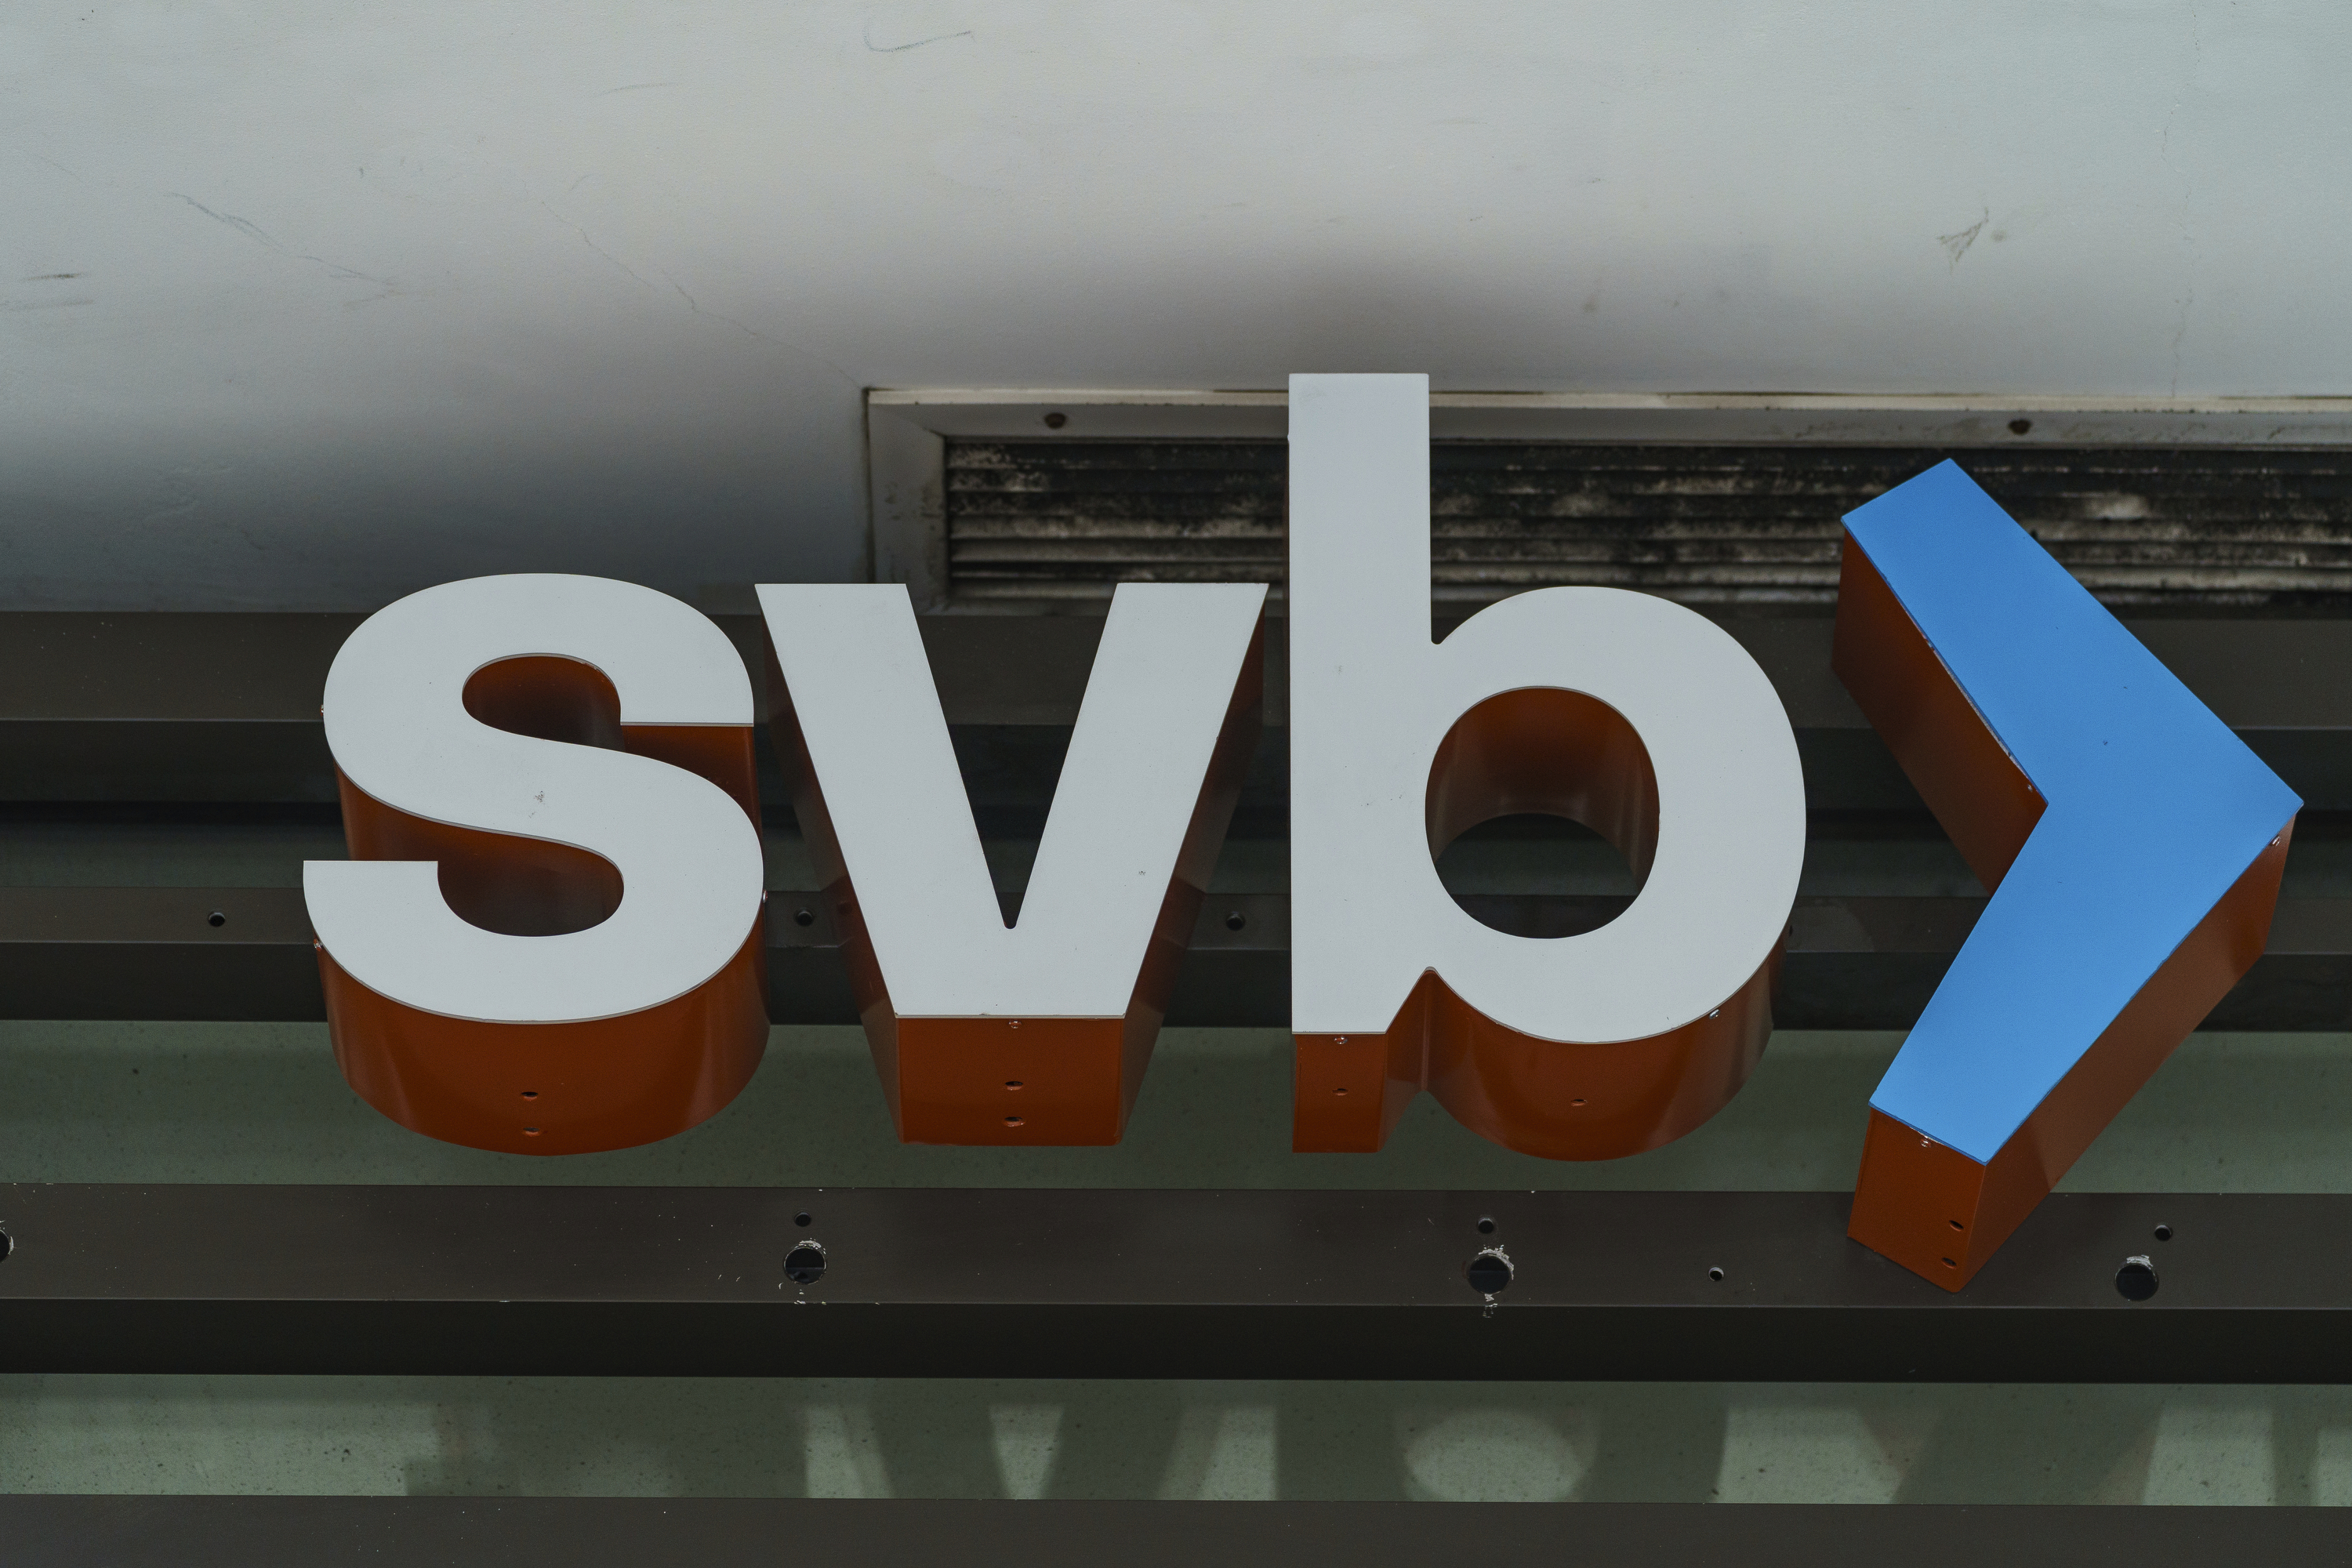 FILE - The Silicon Valley Bank logo is seen at a branch in Pasadena, Calif., on March 13, 2023. The Federal Deposit Insurance Corporation said Monday, March 27, that First Citizens would buy much of Silicon Valley Bank, whose bankruptcy rocked the banking sector.  (AP Photo/Damian Dovarganes, File)